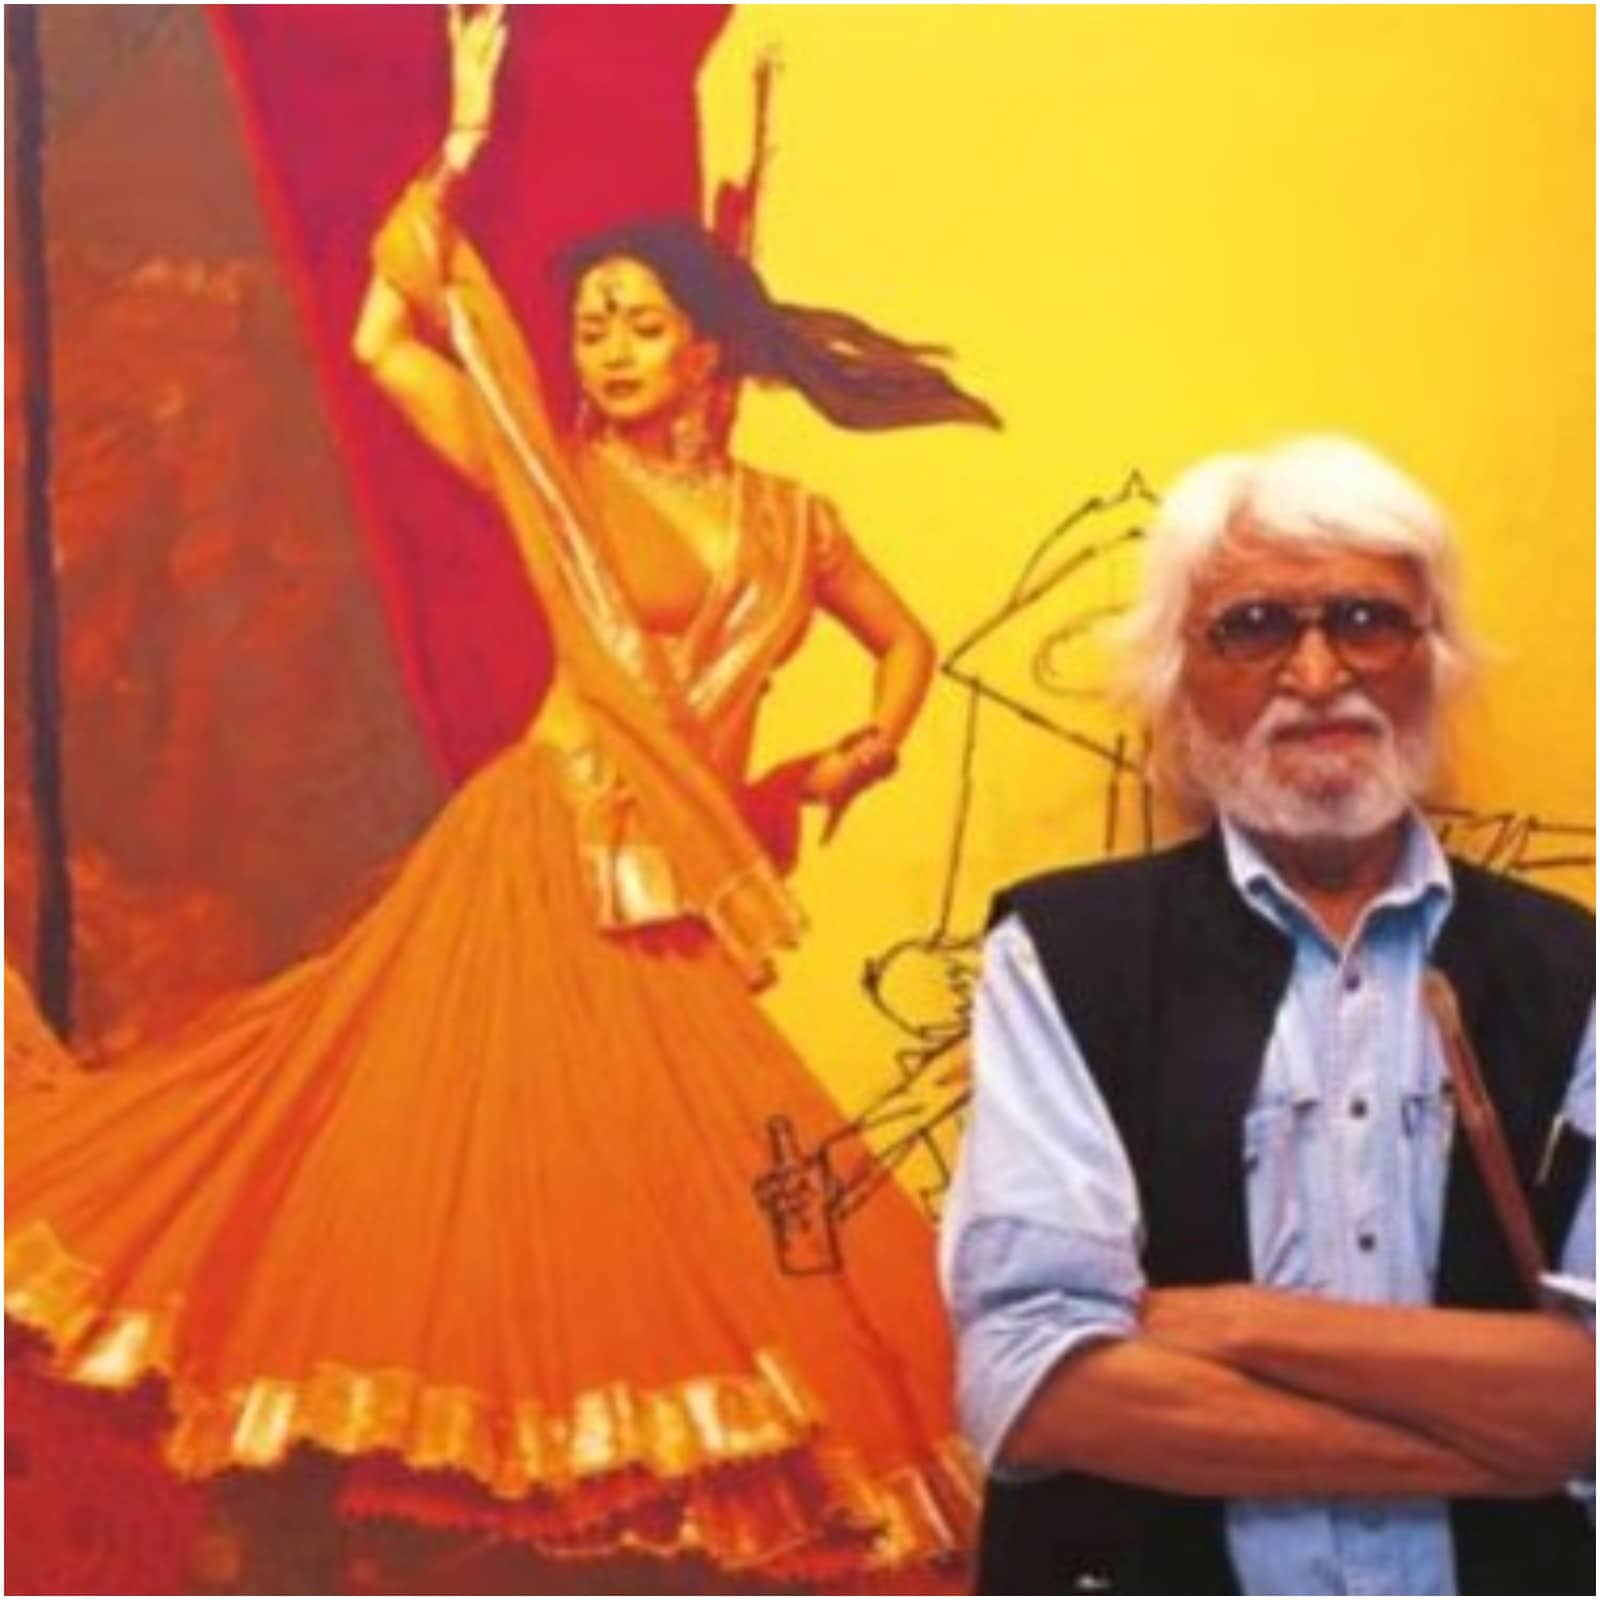 The painter and philosopher remembering MF Husain on his ninth death  anniversary